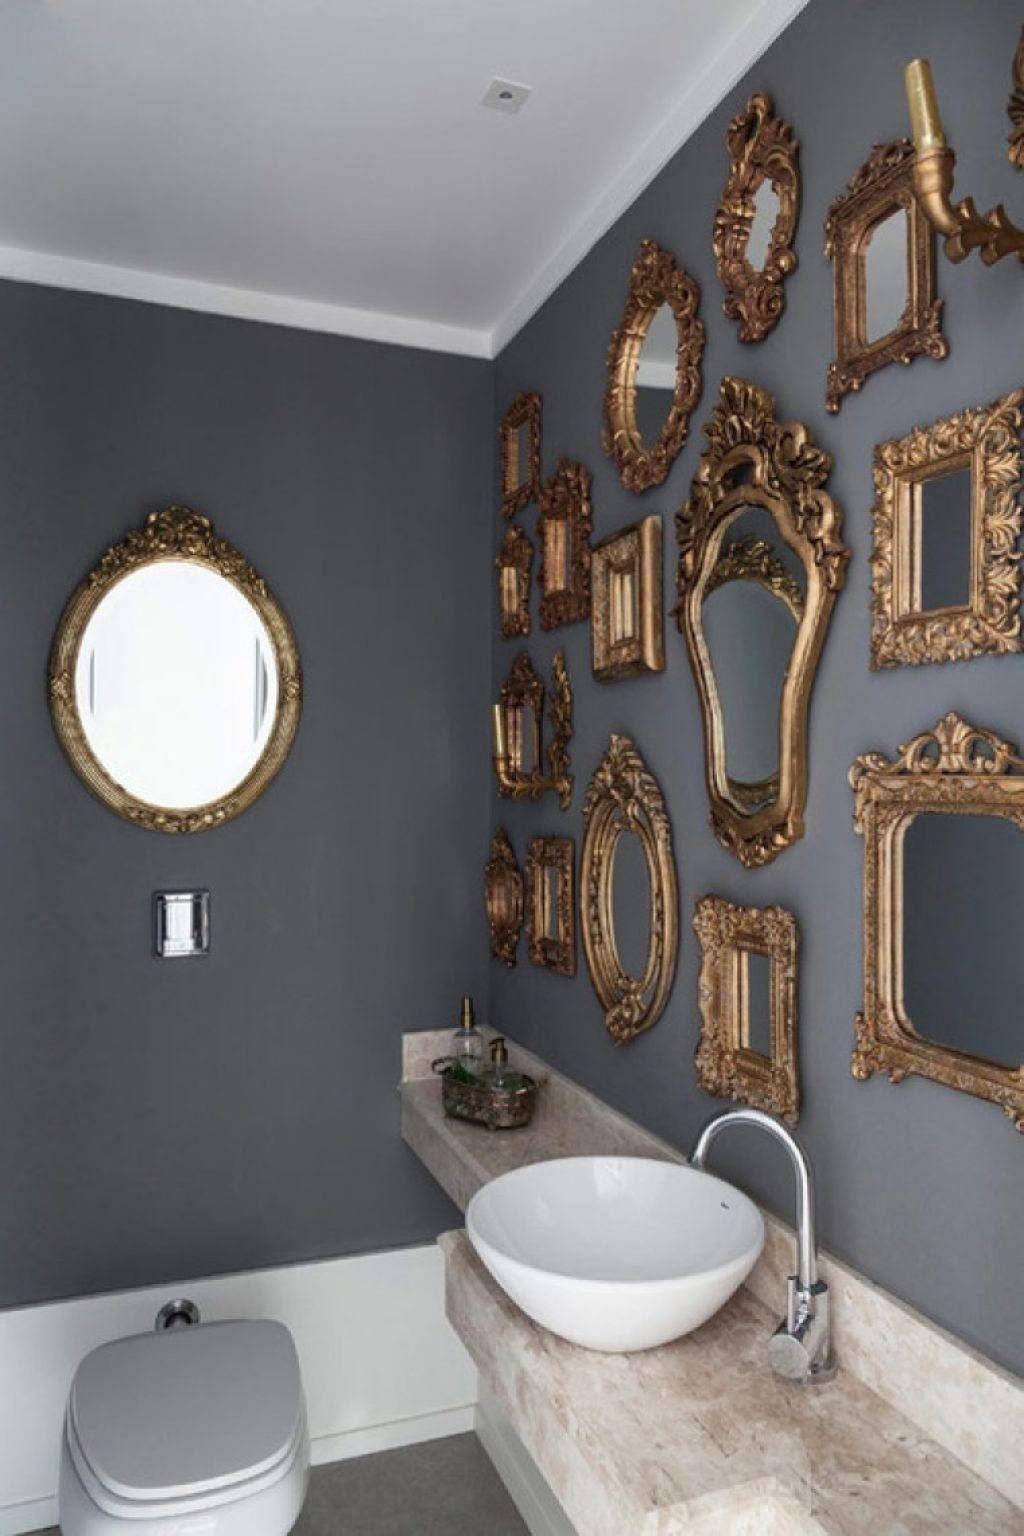 Ornate Mirrors Placed In The Bathroom With Grey Walls – Decorative Within Ornate Bathroom Mirrors (View 21 of 25)